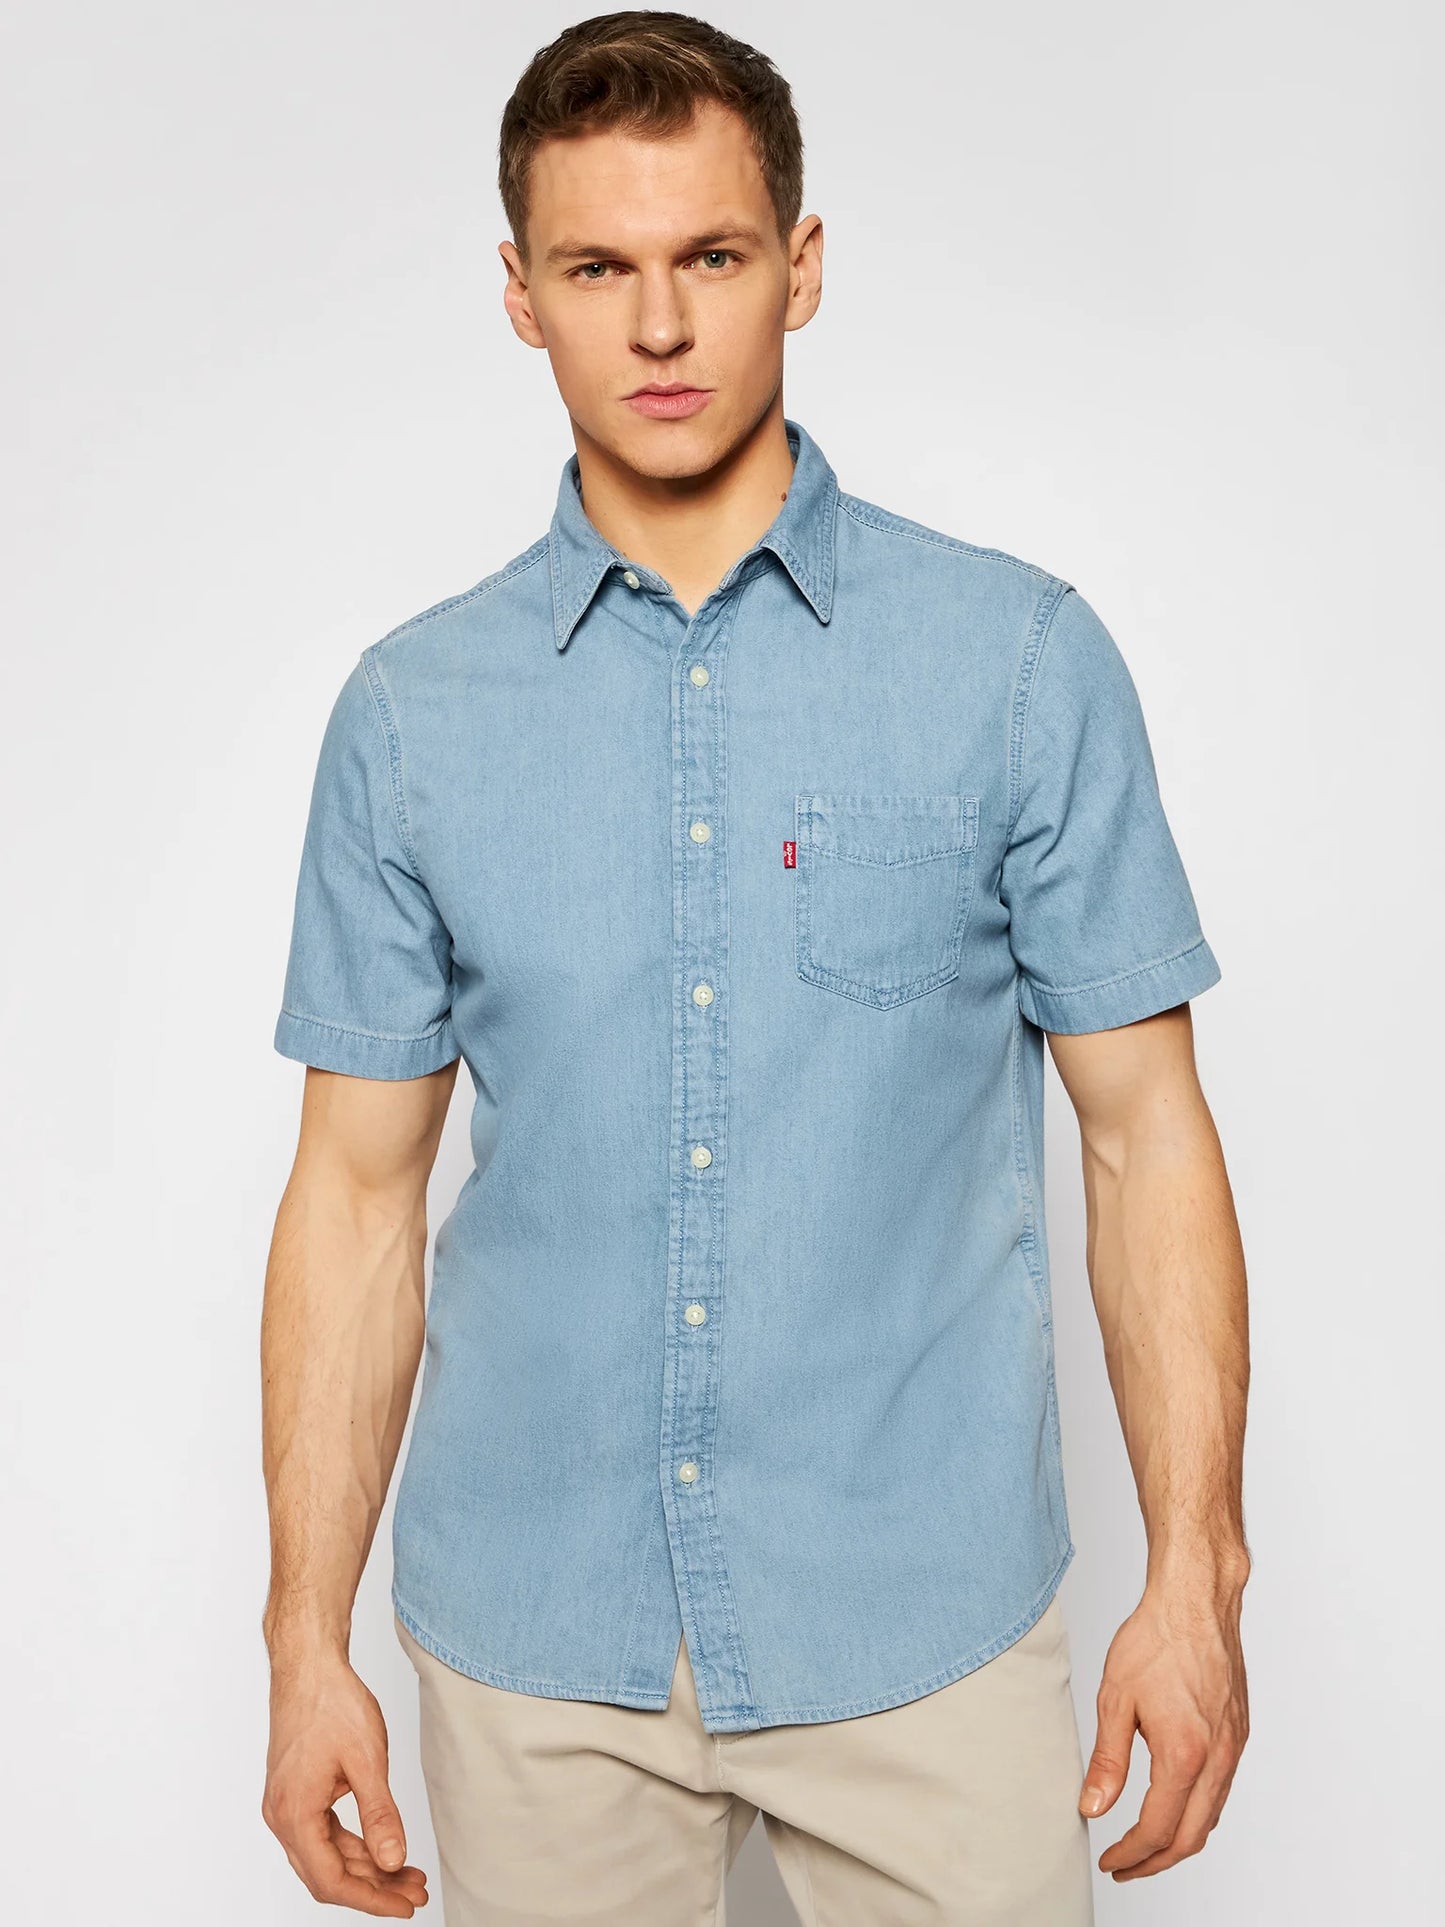 Levi'S-H-SHEMISSAIRE Classic 1 with pocket